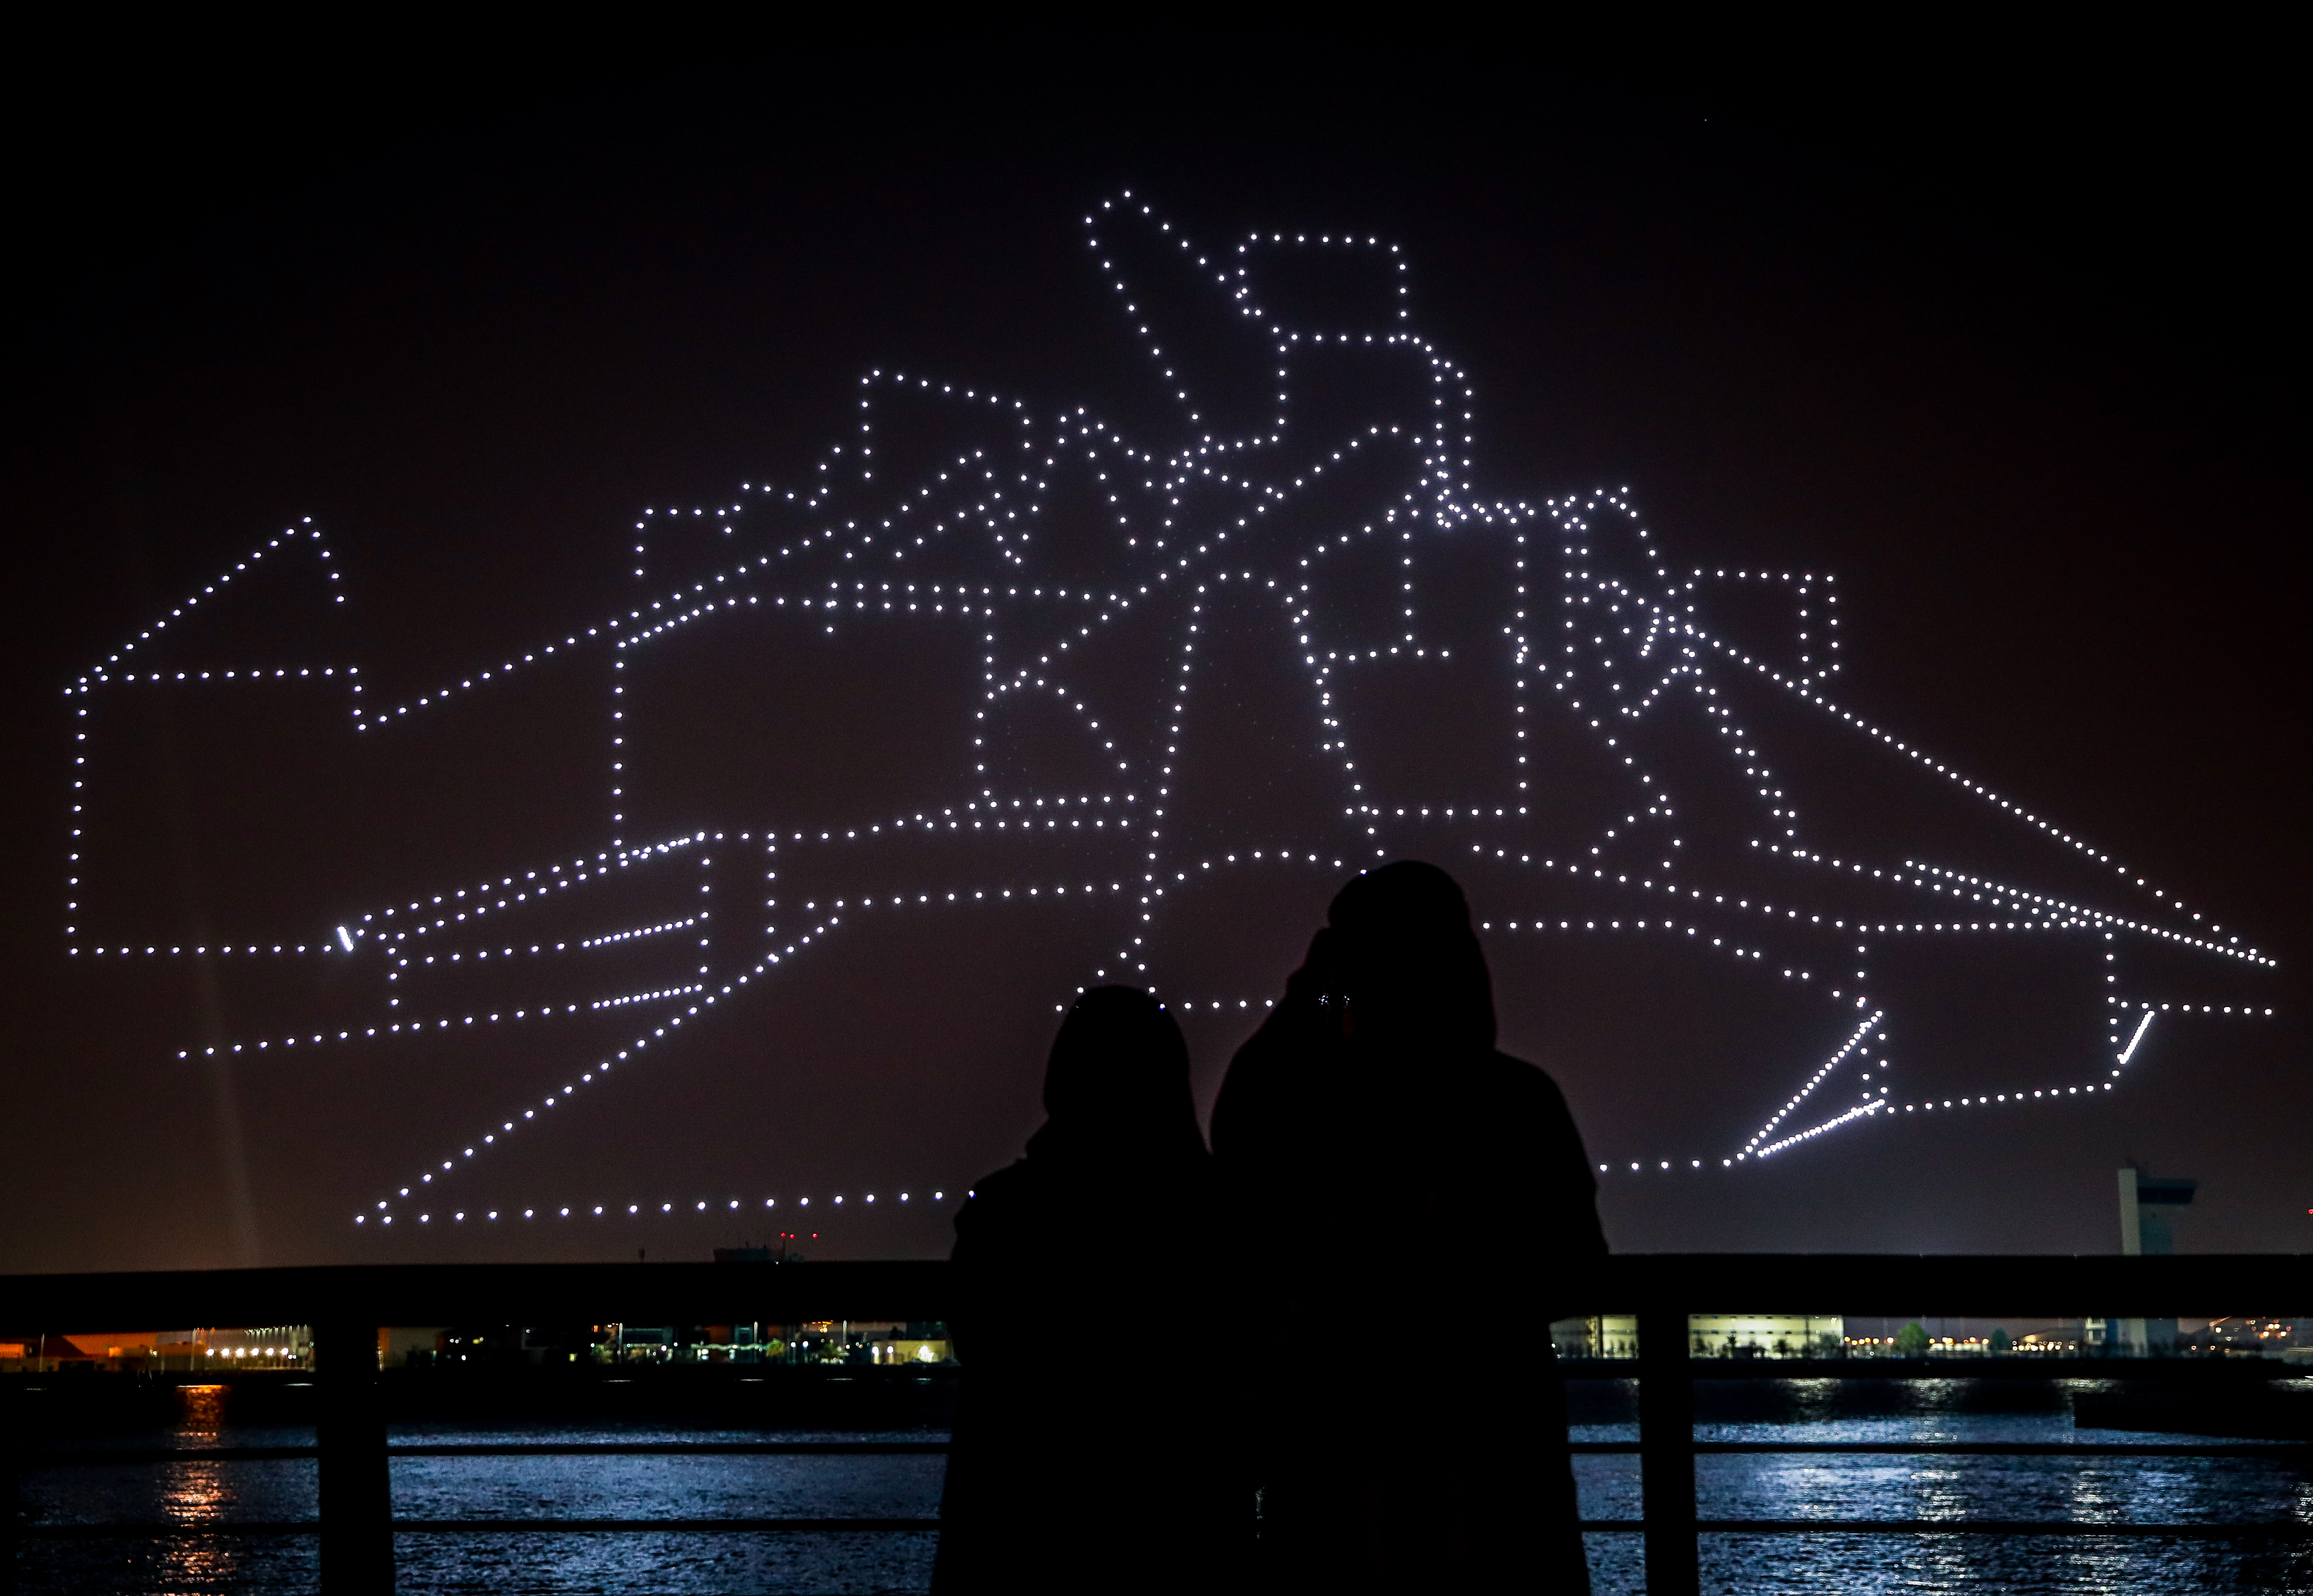 Drone show lights up the sky at Louvre Abu Dhabi